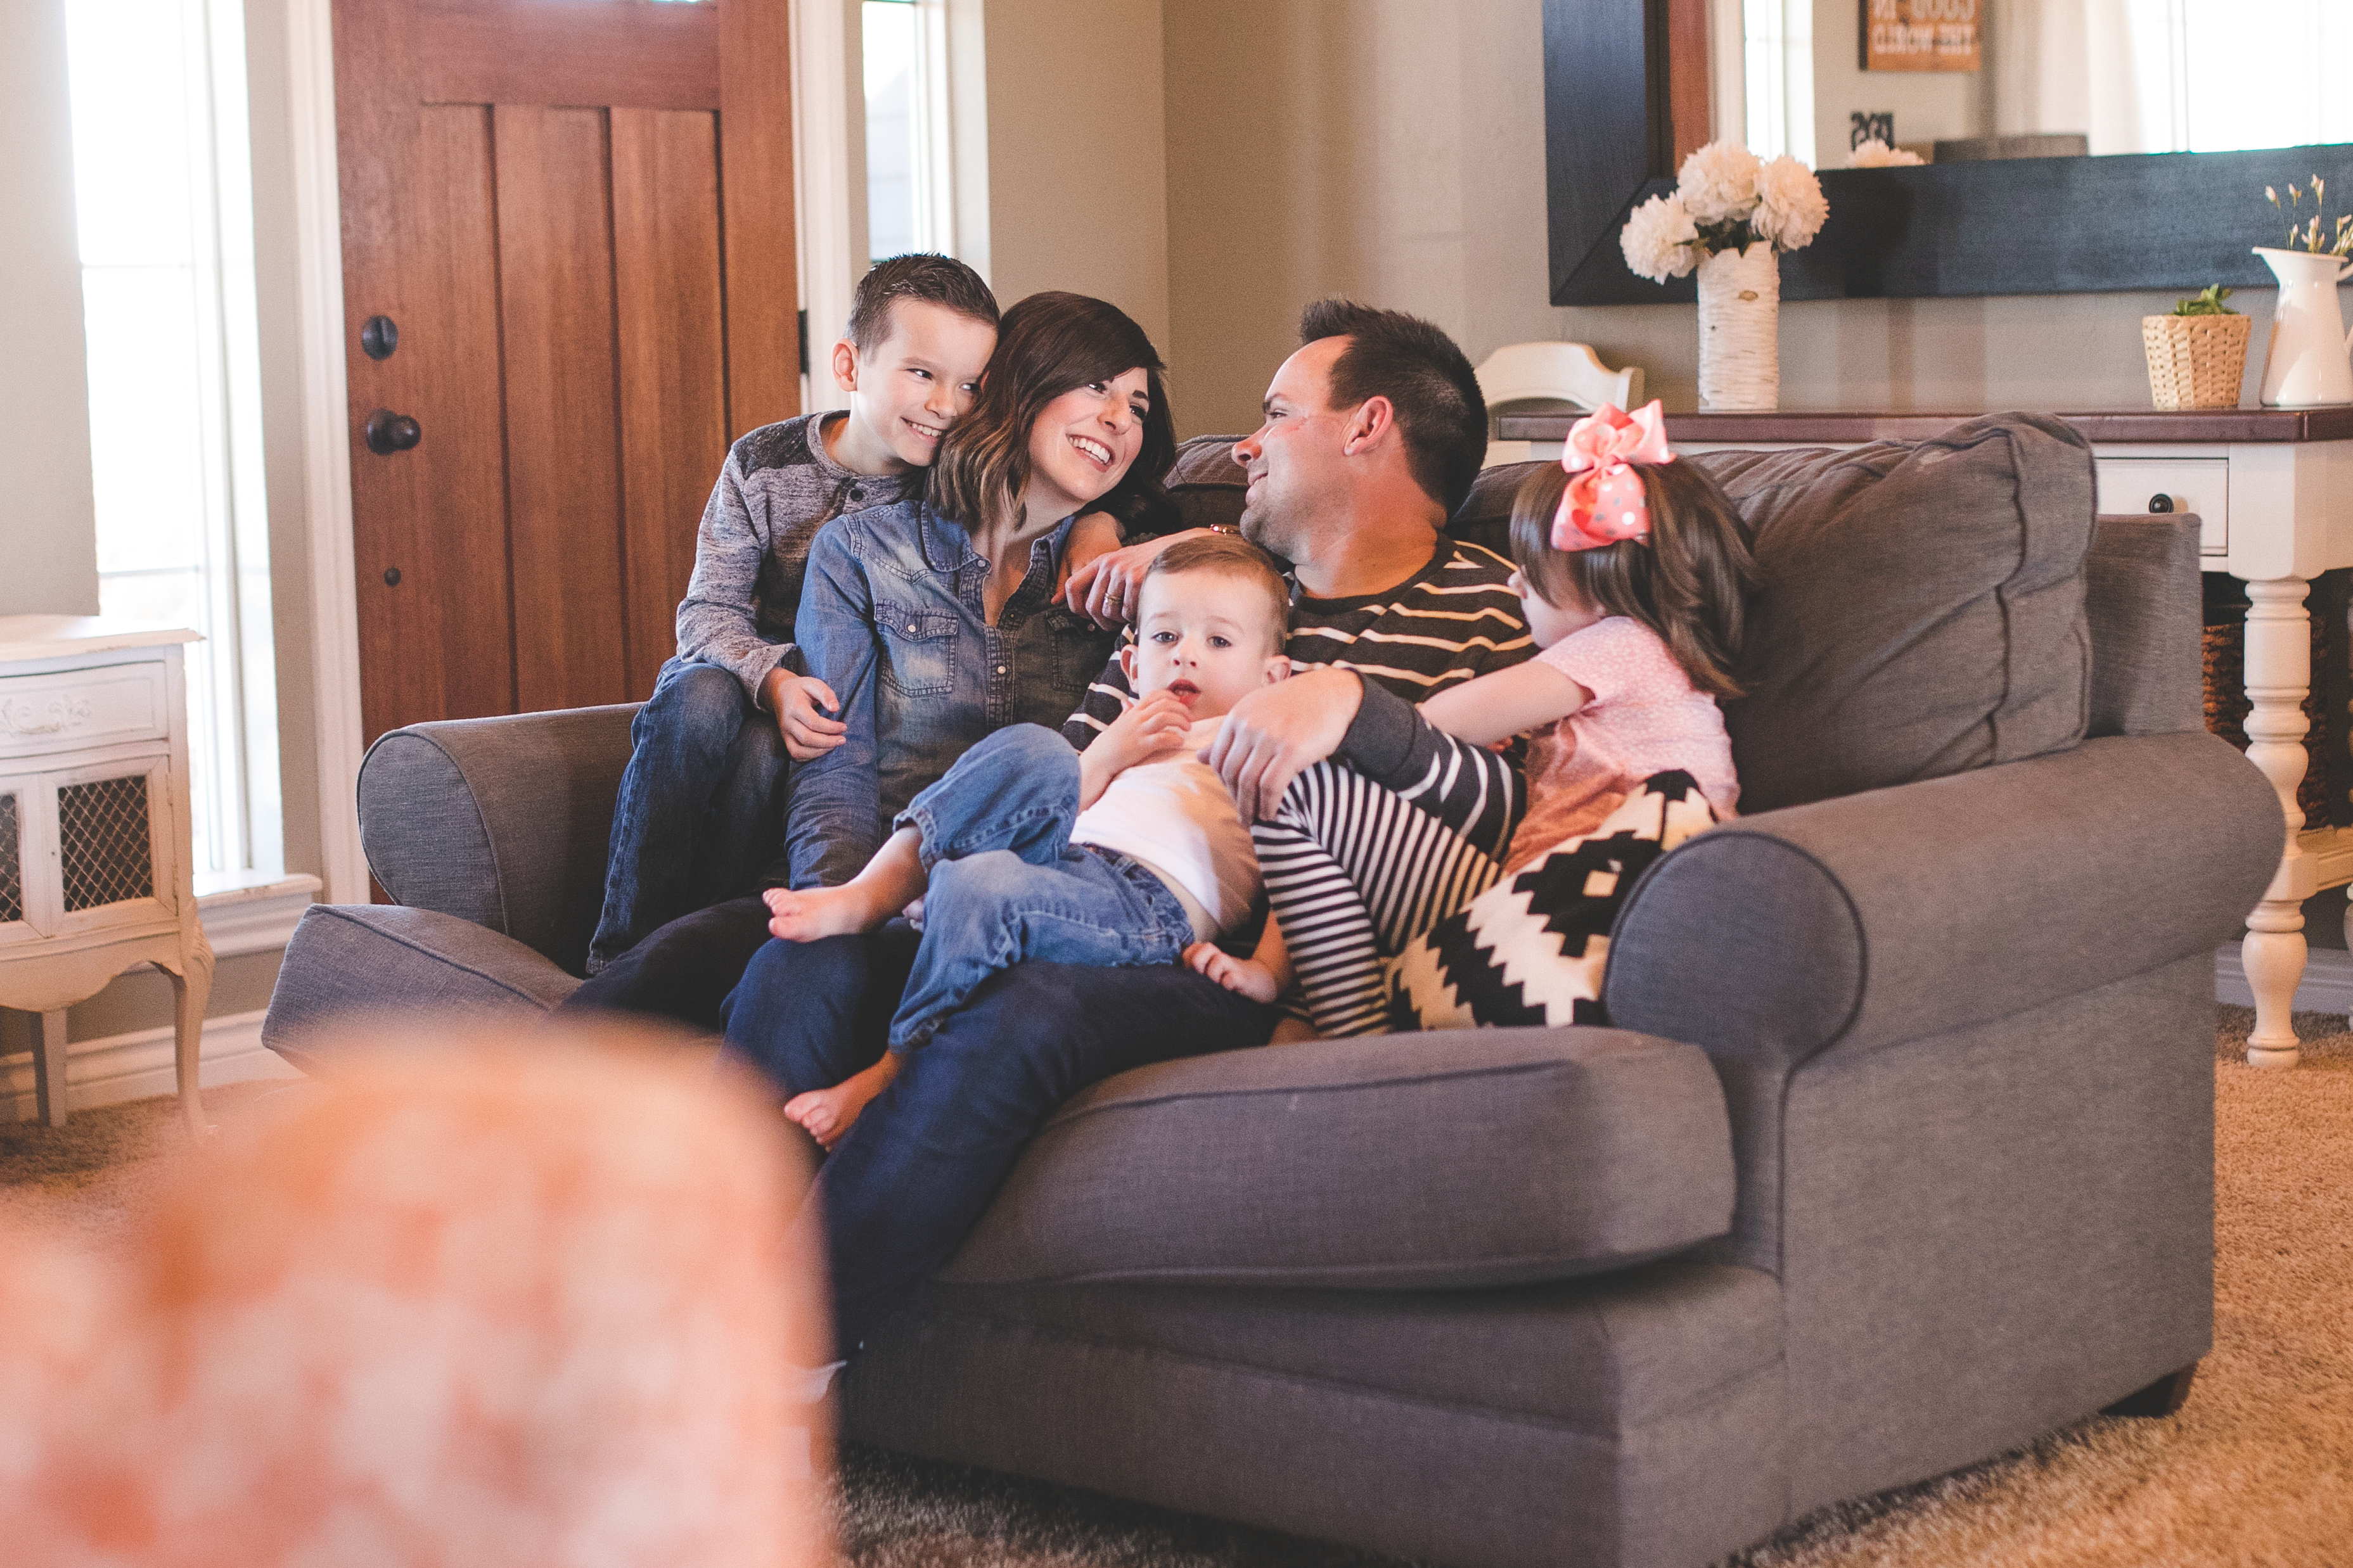 Are Your Kids Ruling The House? Five Ways to Reconnect With Your Spouse